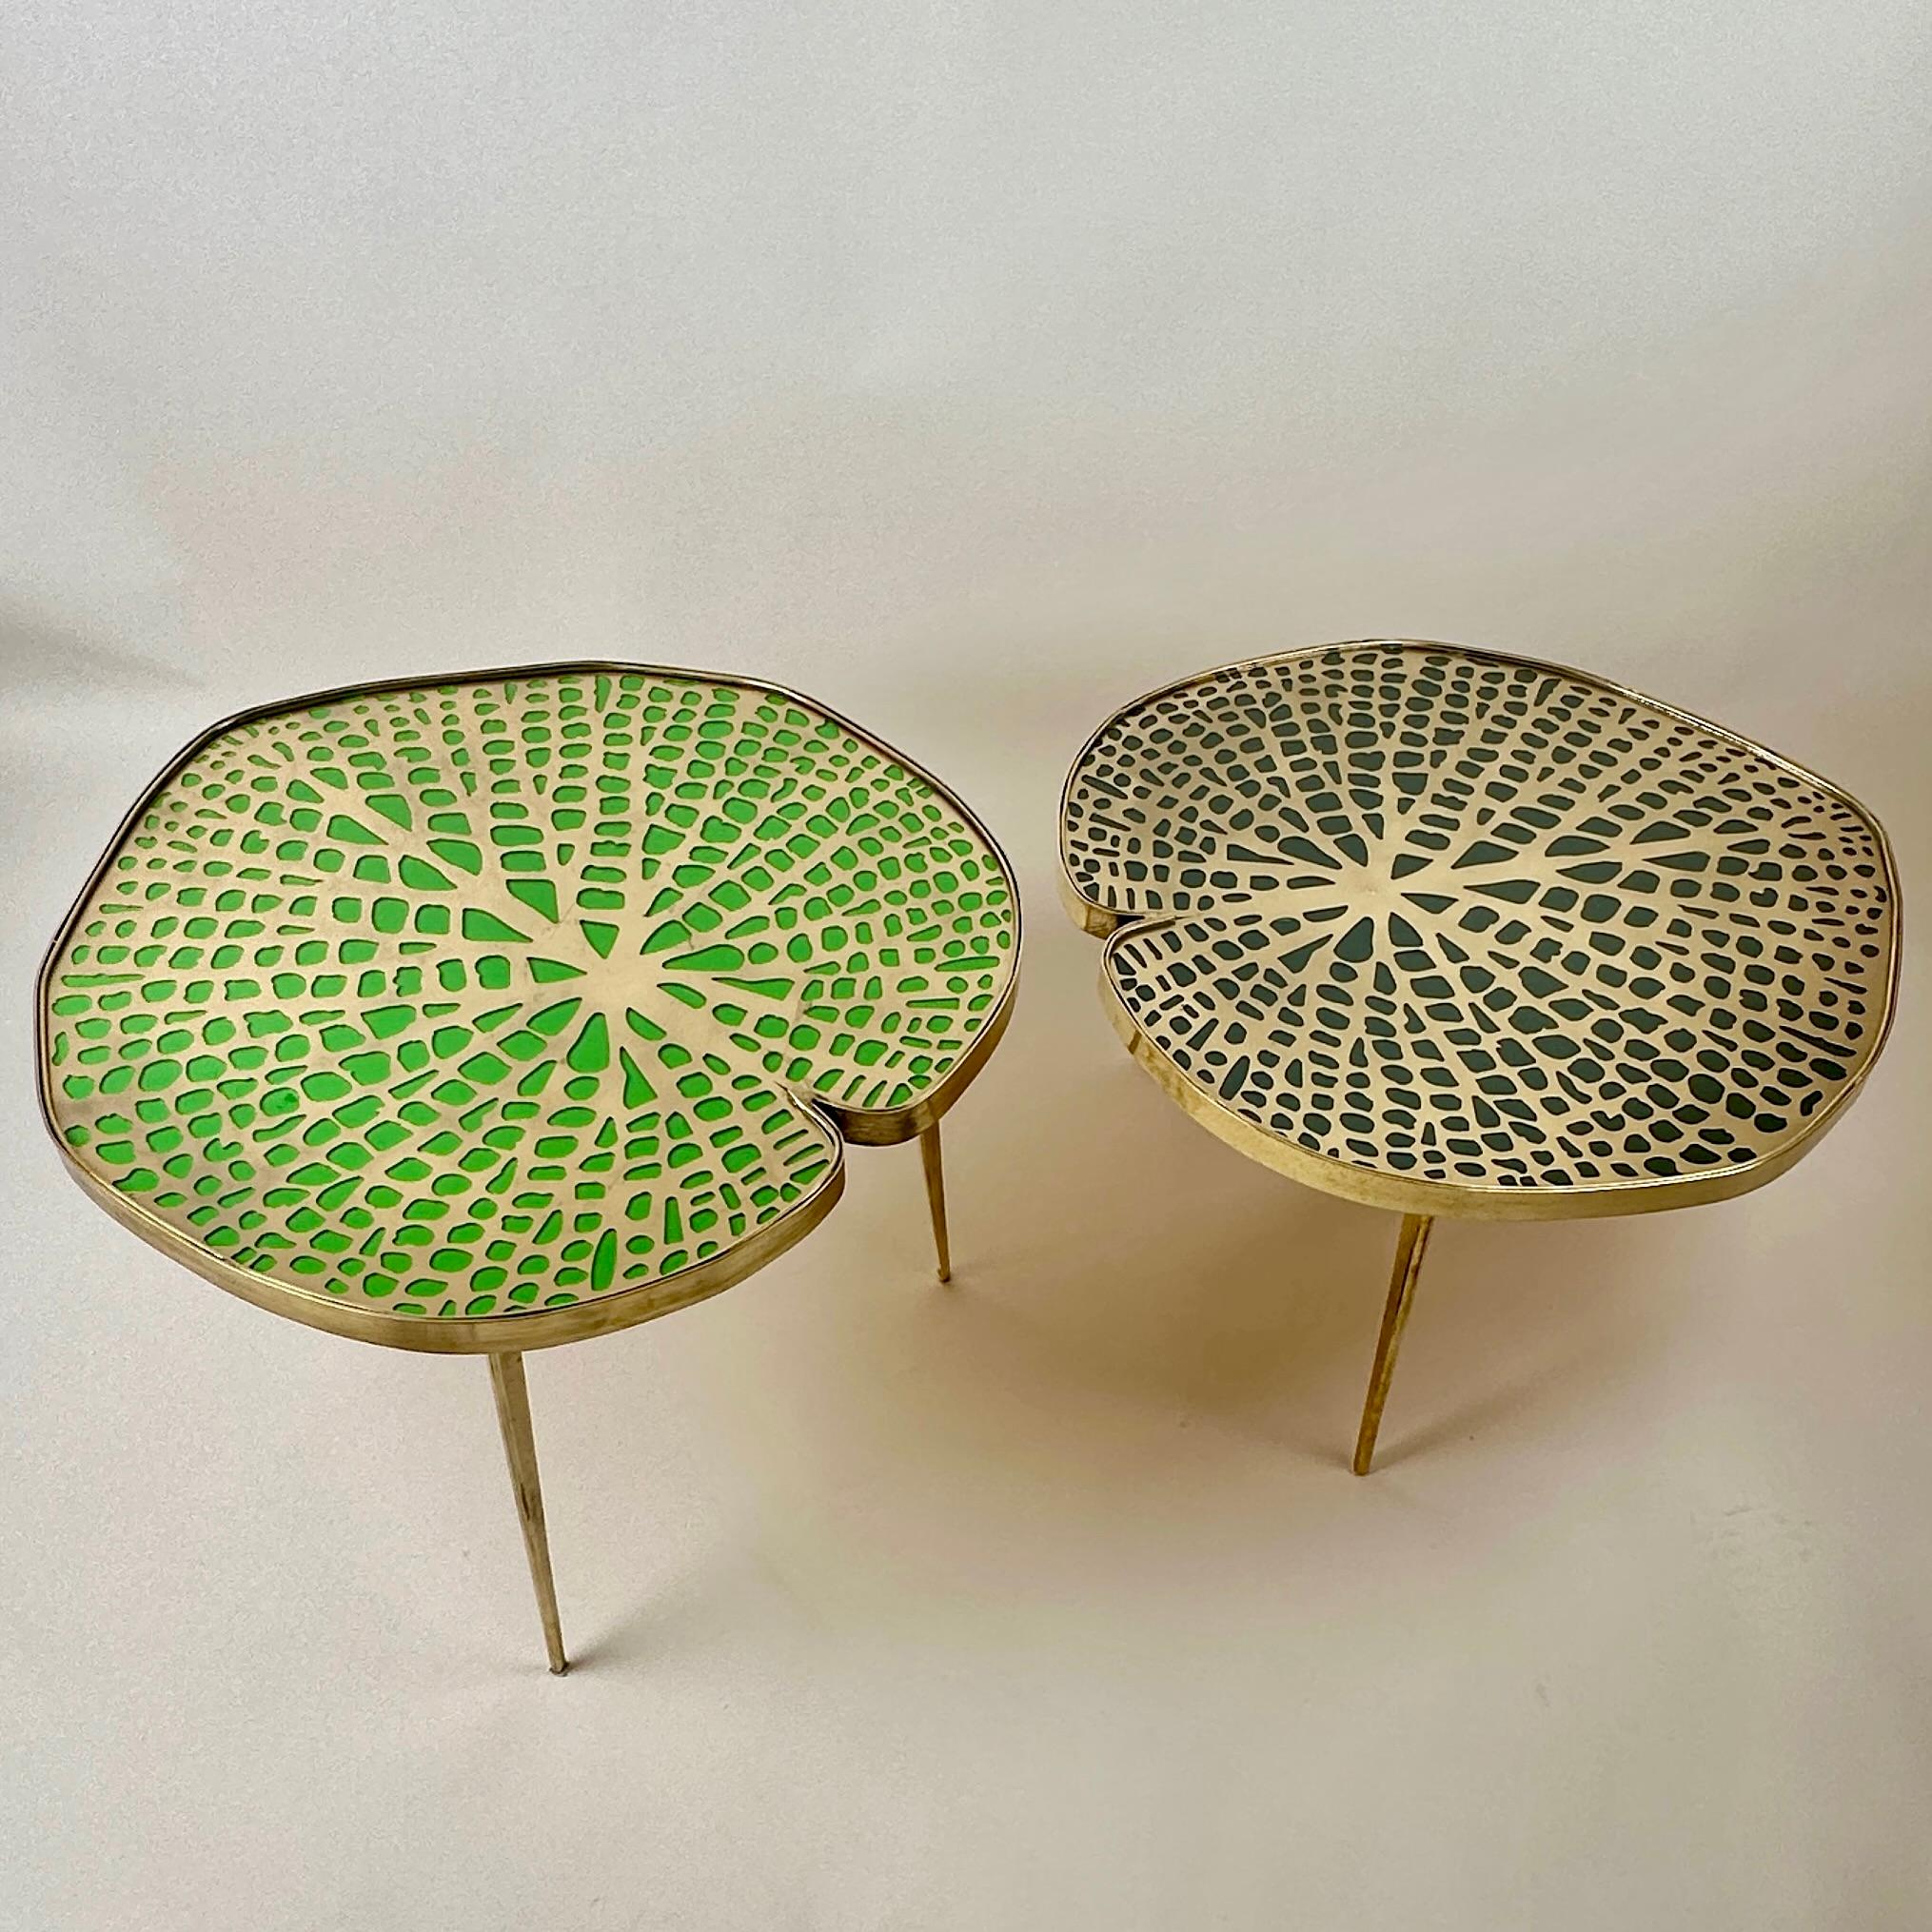 Pair of eclectic water lilies side tables / coffee tables with glass tops & leaf venation in gold metal underneath to create a small pond of beauty inside your living room.
The wood top under the gold metal venation of one table is painted moss